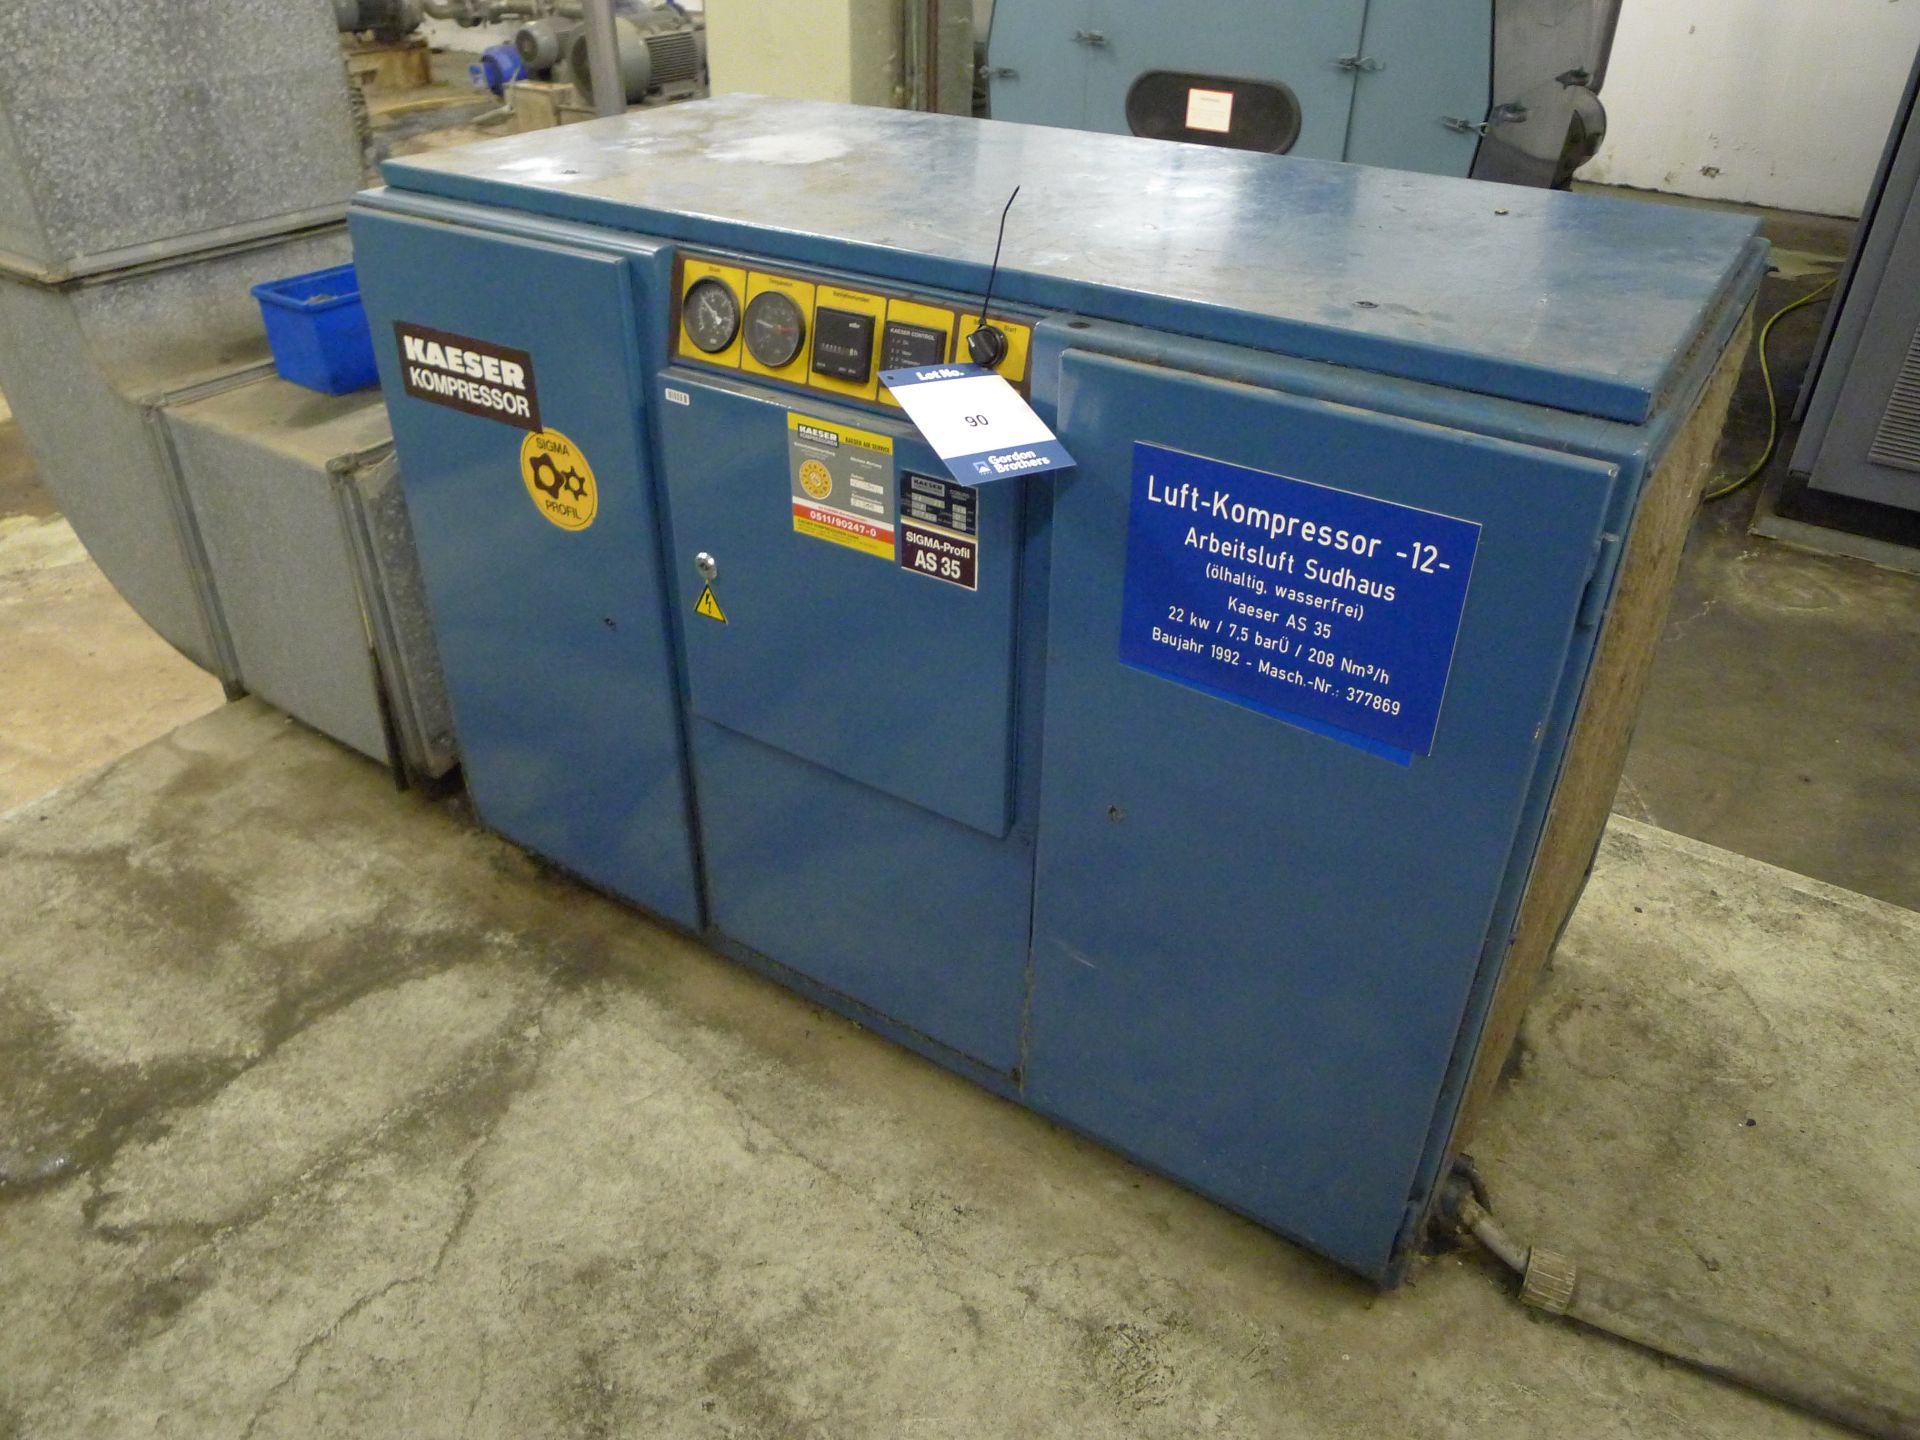 Kaeser AS-35 rotary screw air compressor Serial number 377869 (Dismantling and Loading Fee: €650)